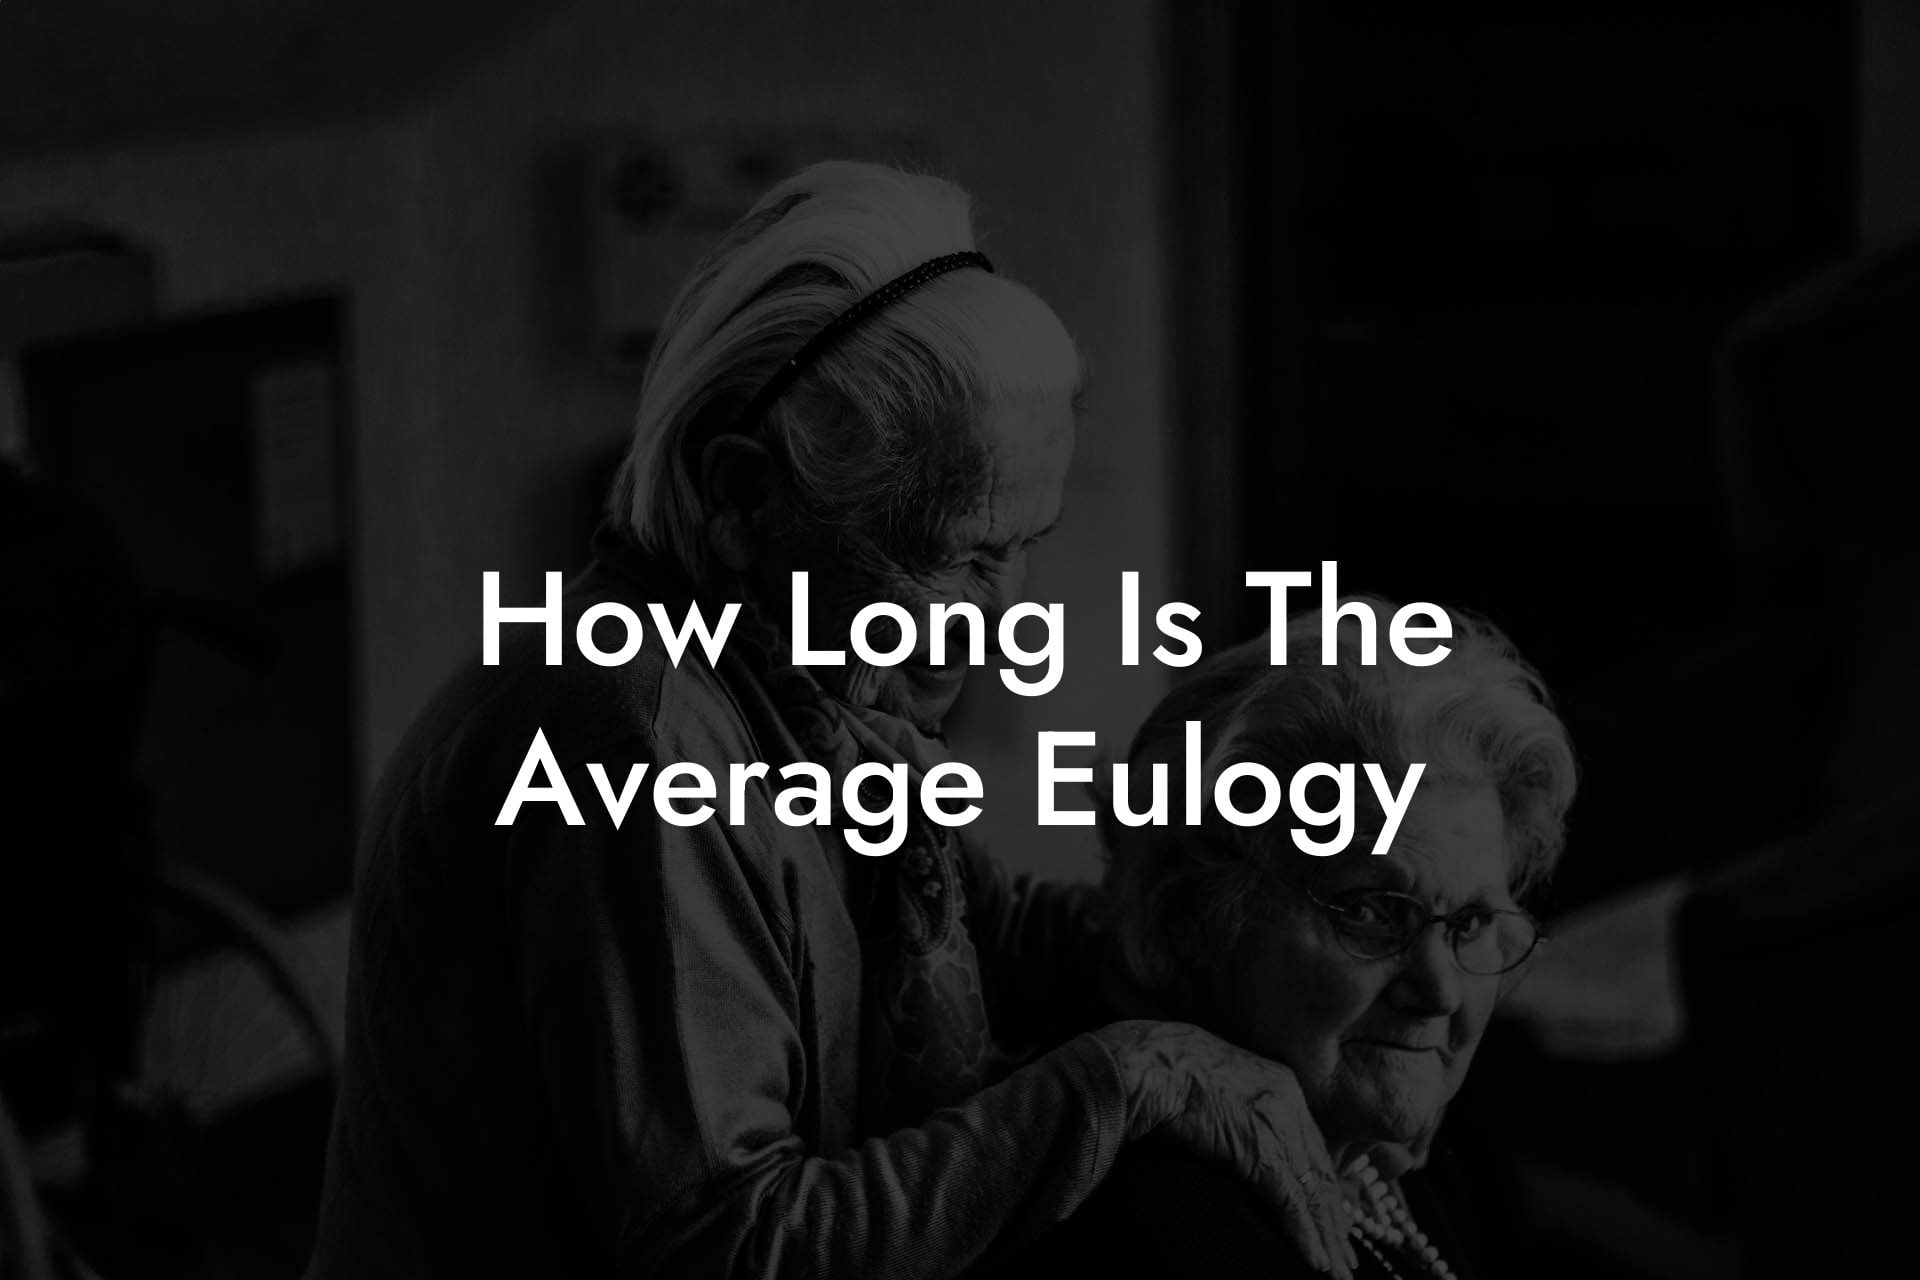 How Long Is The Average Eulogy?